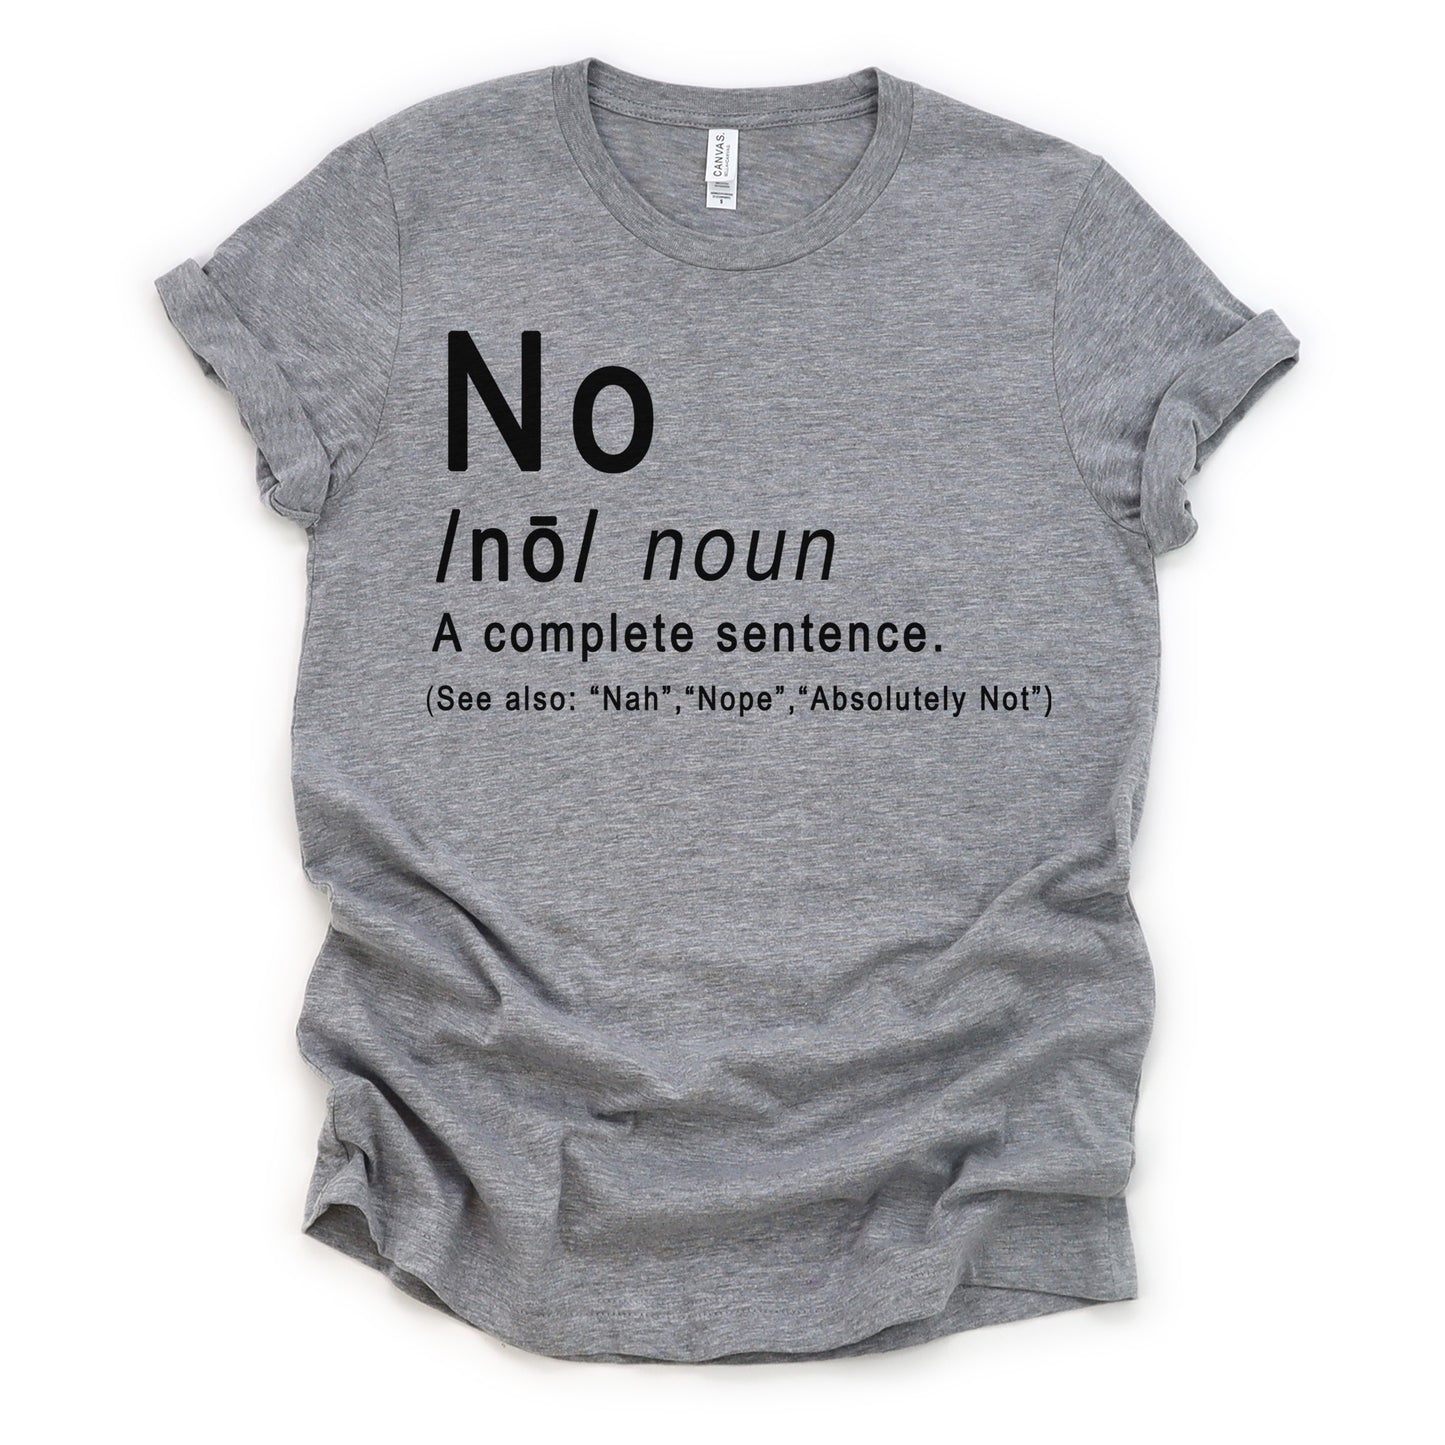 "No Is A Complete Sentence" Tee